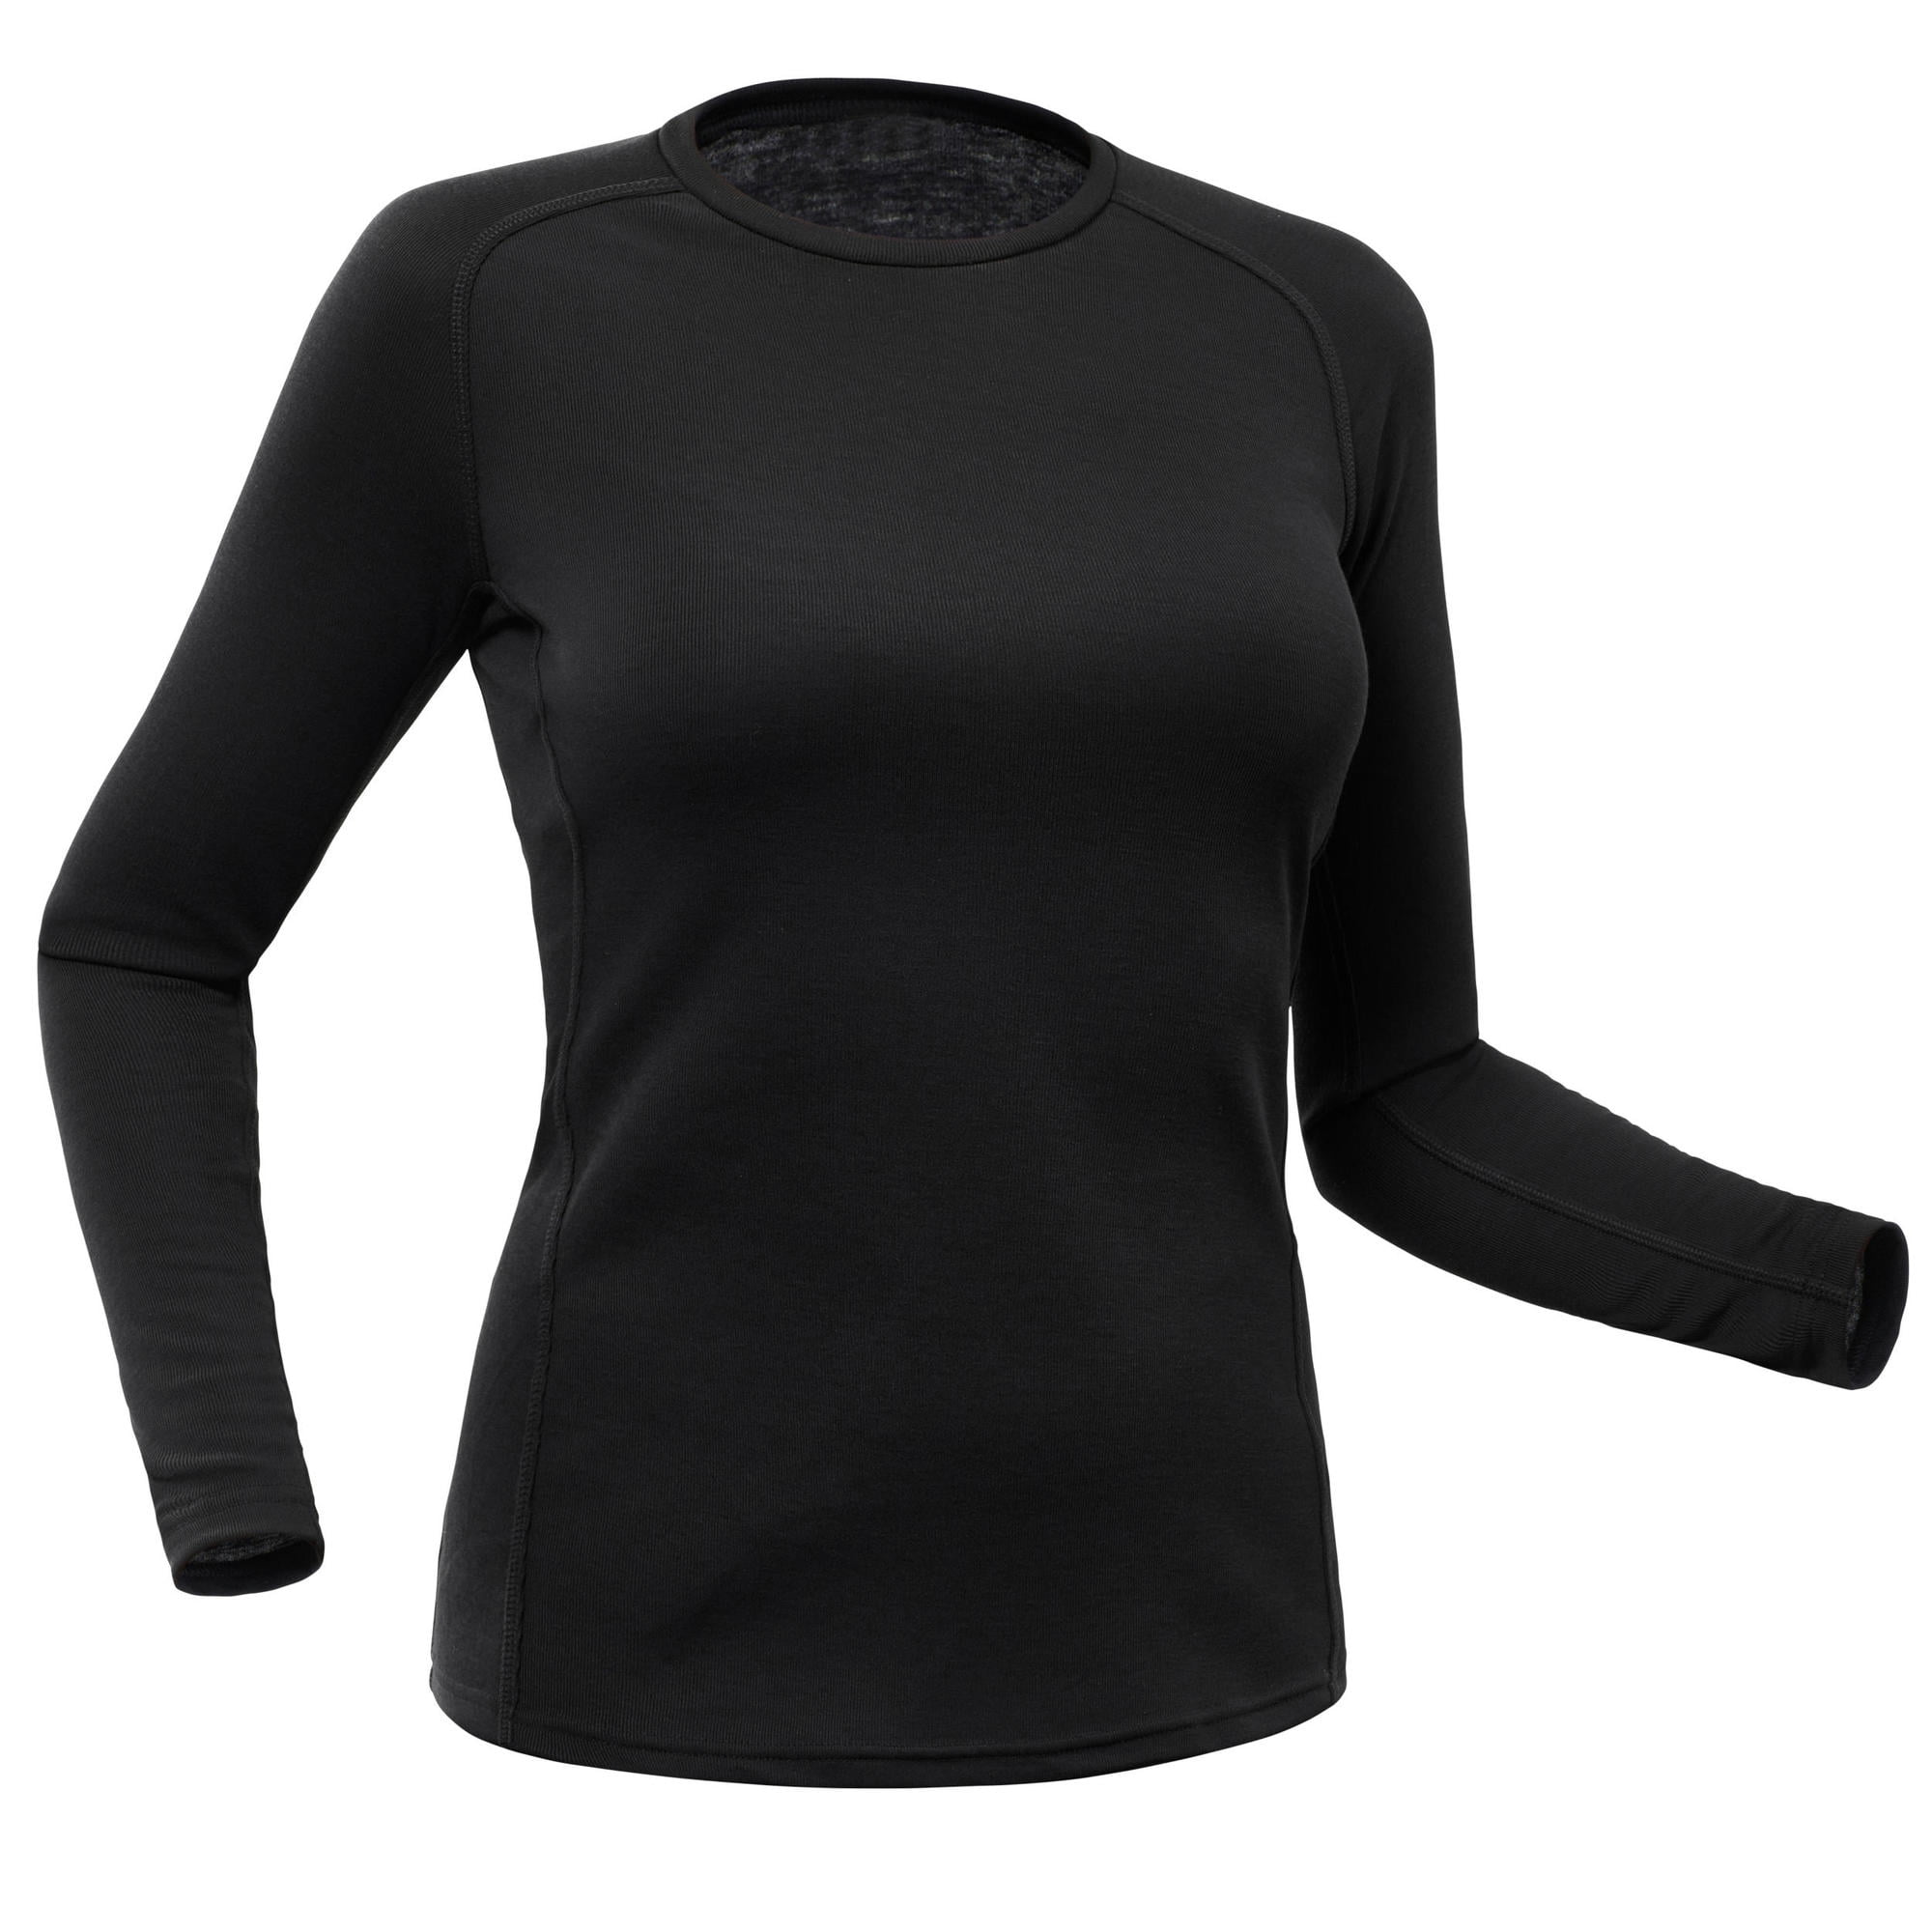 Mock Neck Women Thermal Underwear Shirts Tops Base Layer Activewear Long Sleeved 